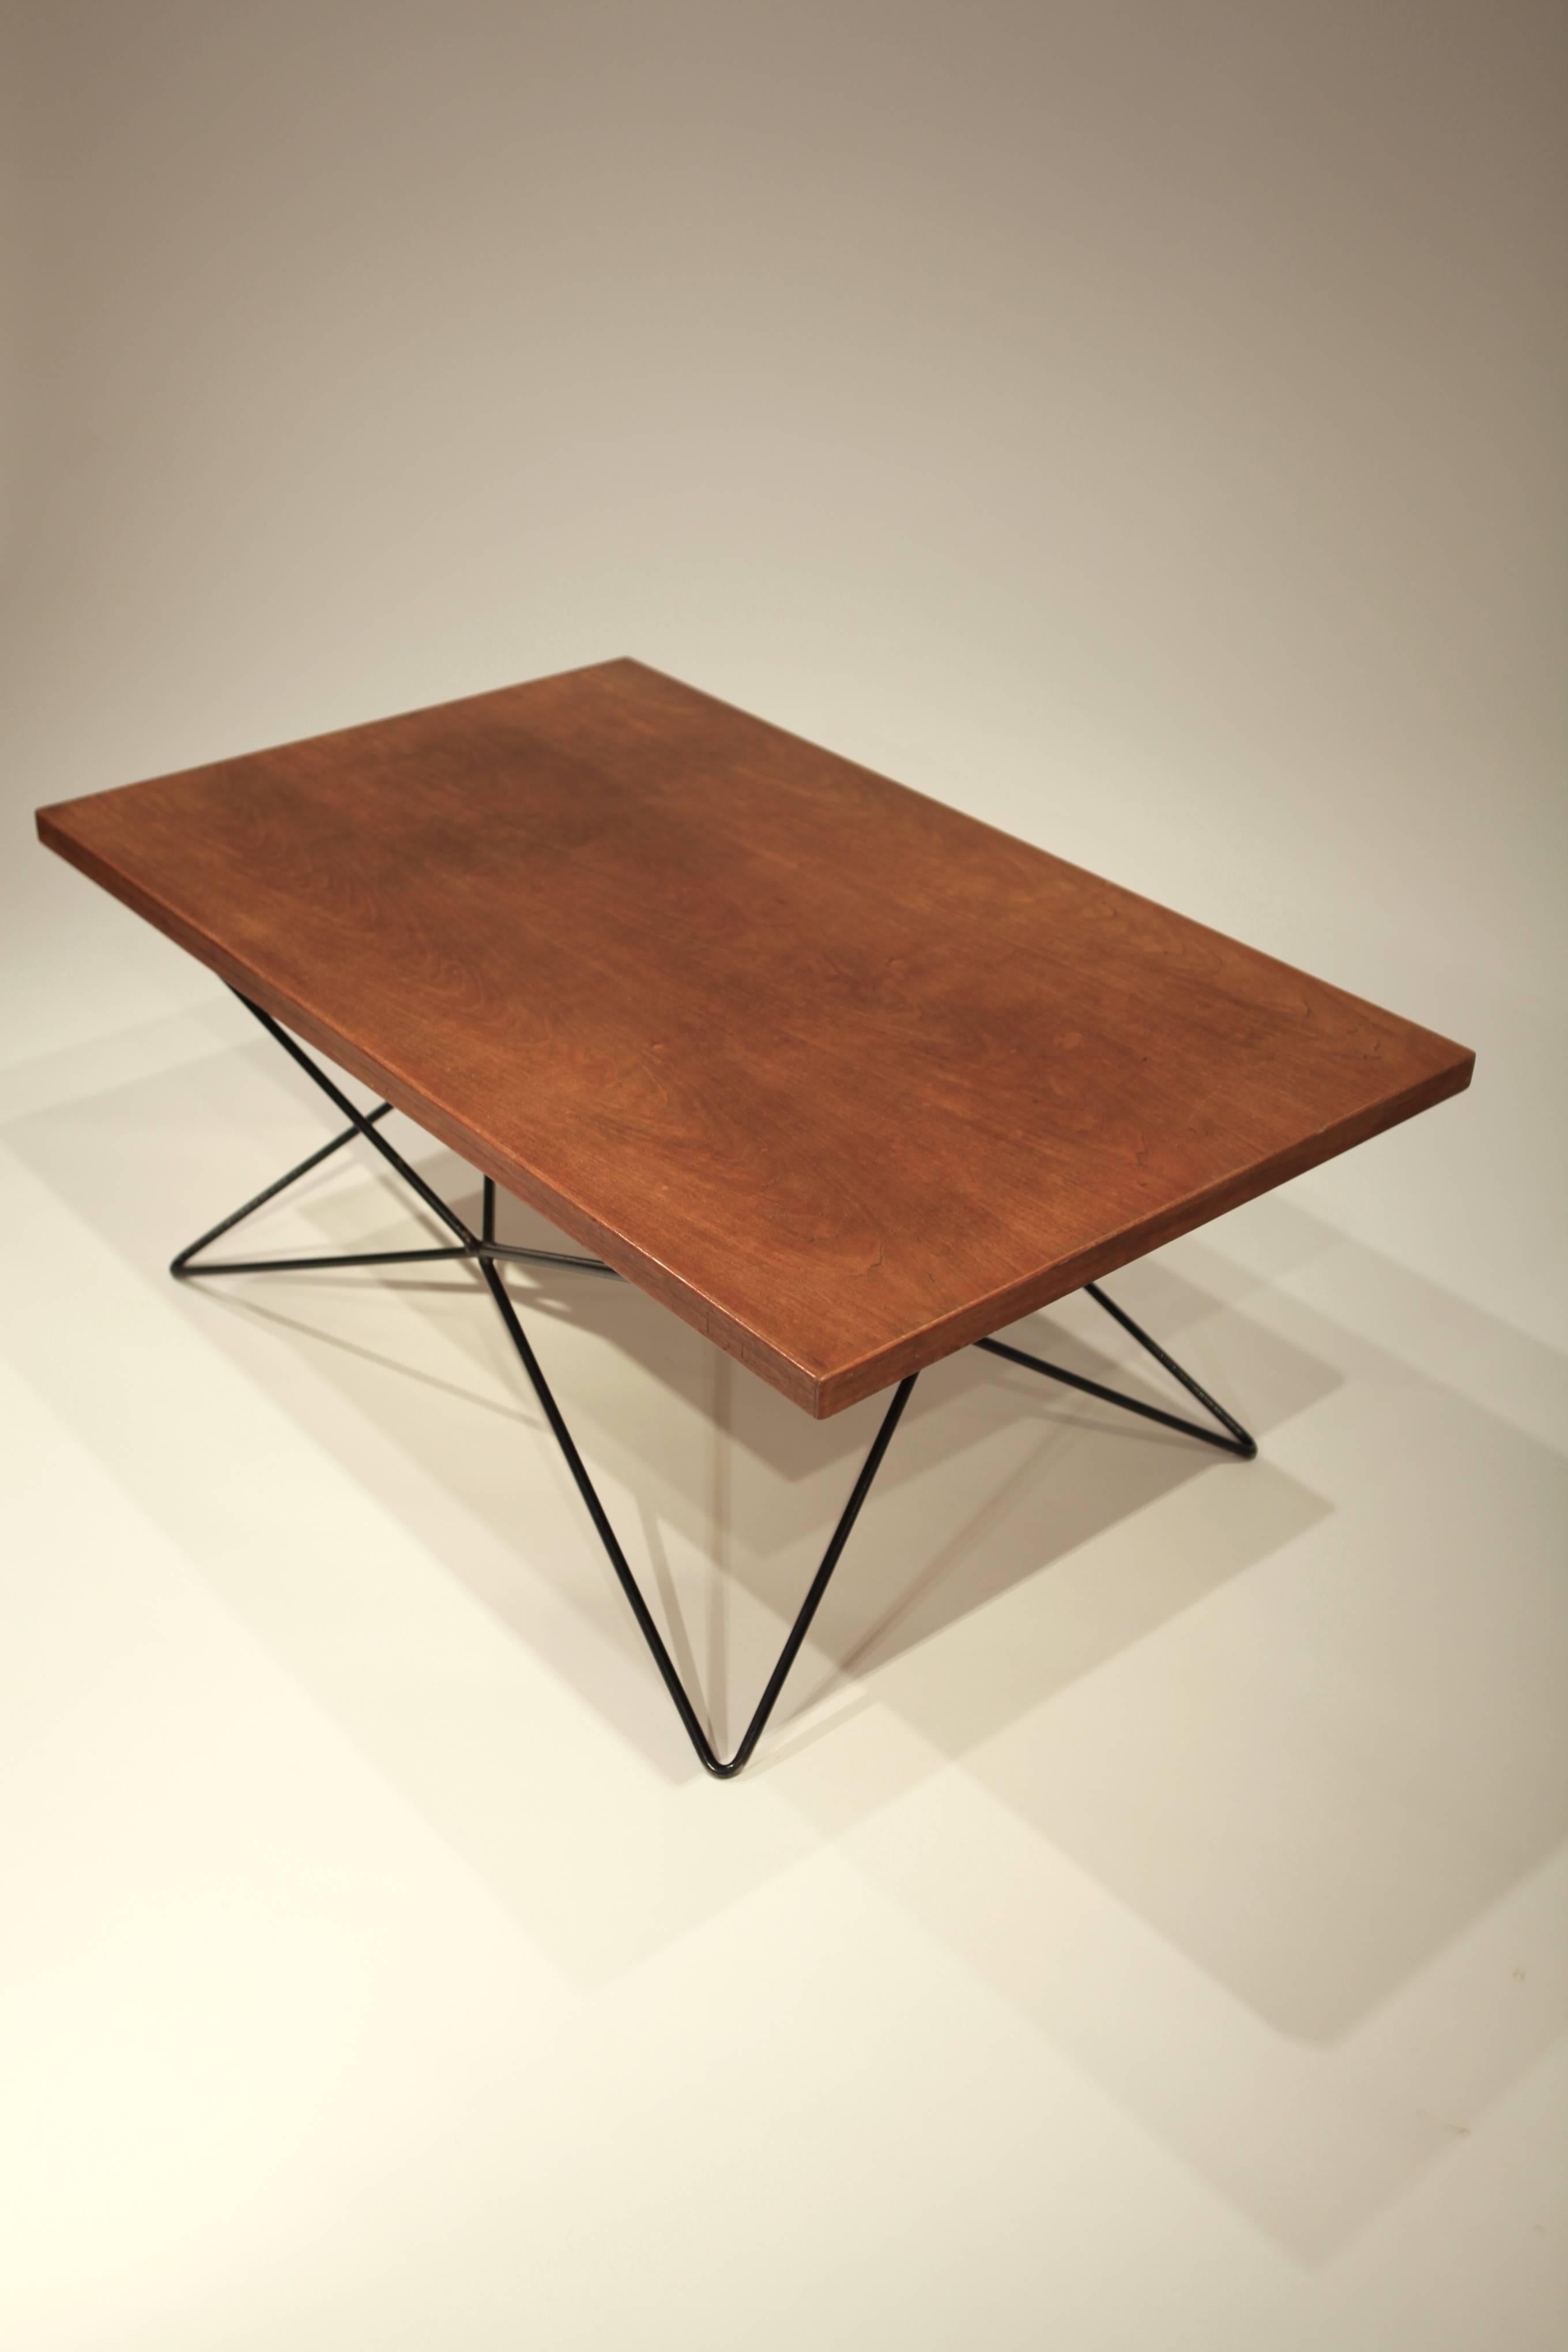 Teak top and black painted iron base coffee table.
Bengt Johan Gullberg, Sweden, 1950s.
Adjustable in 3 height positions by turning the base.